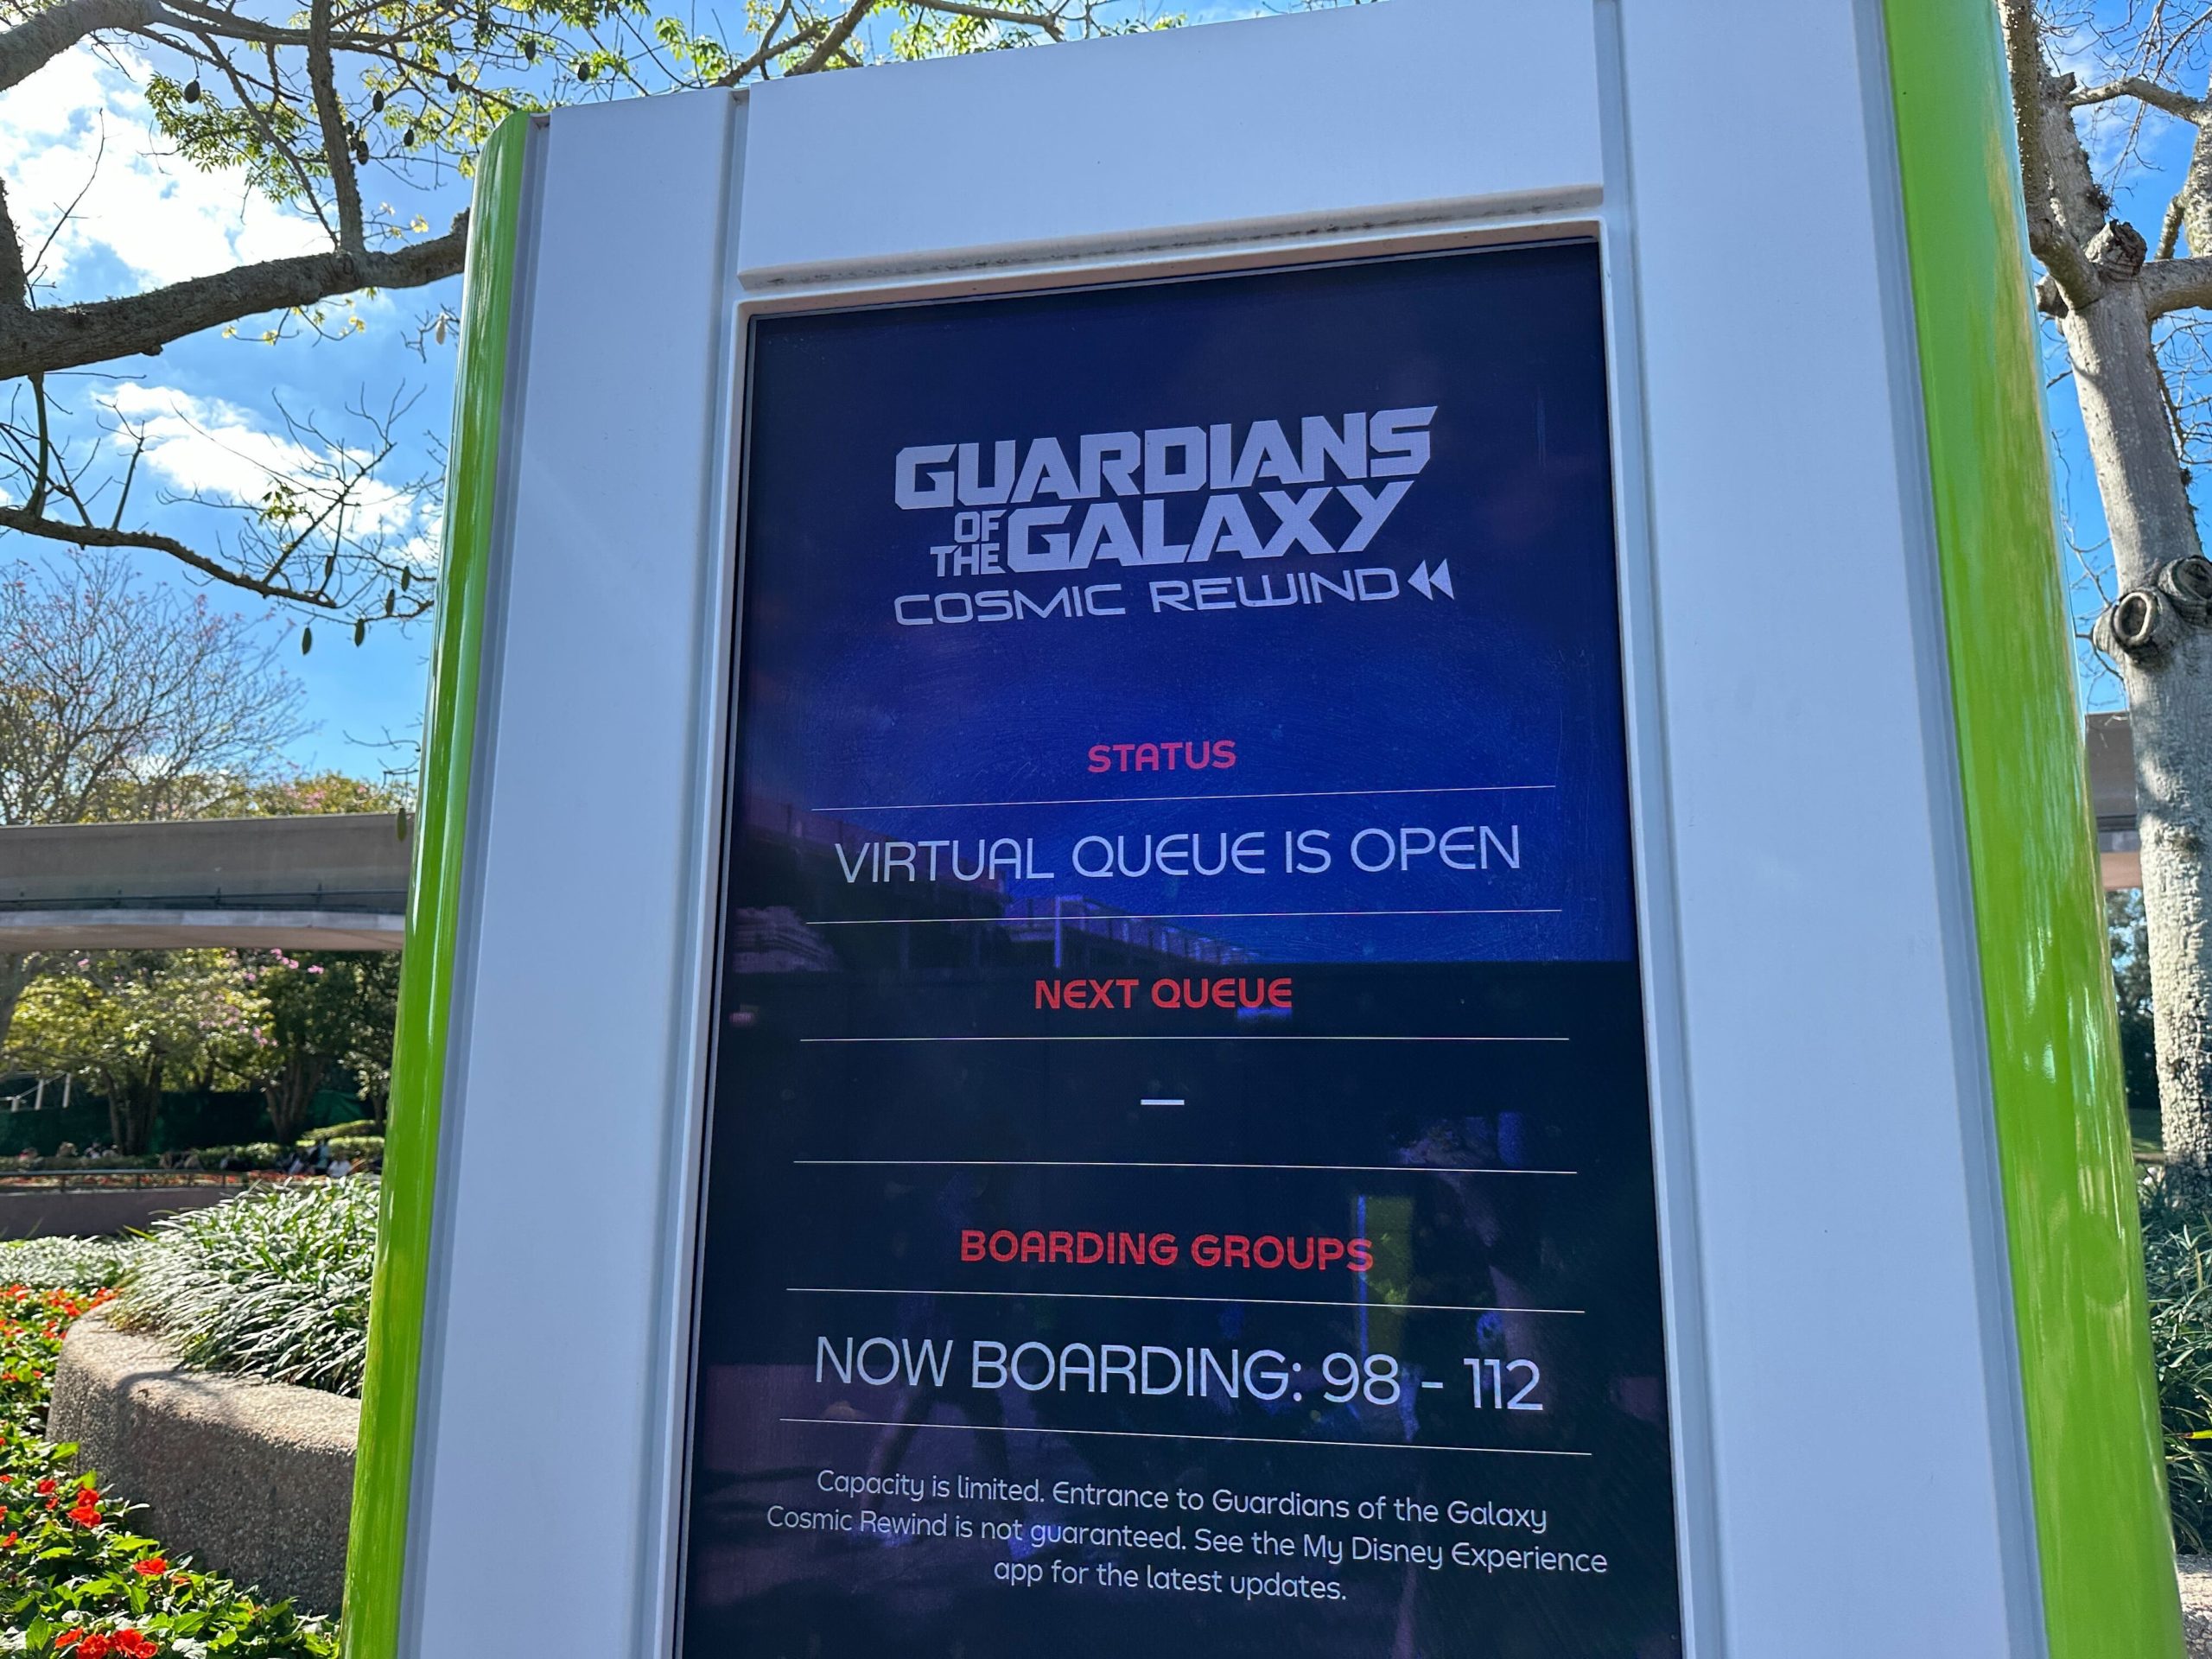 Epcot's Guardian of the Galaxy Cosmic Rewind